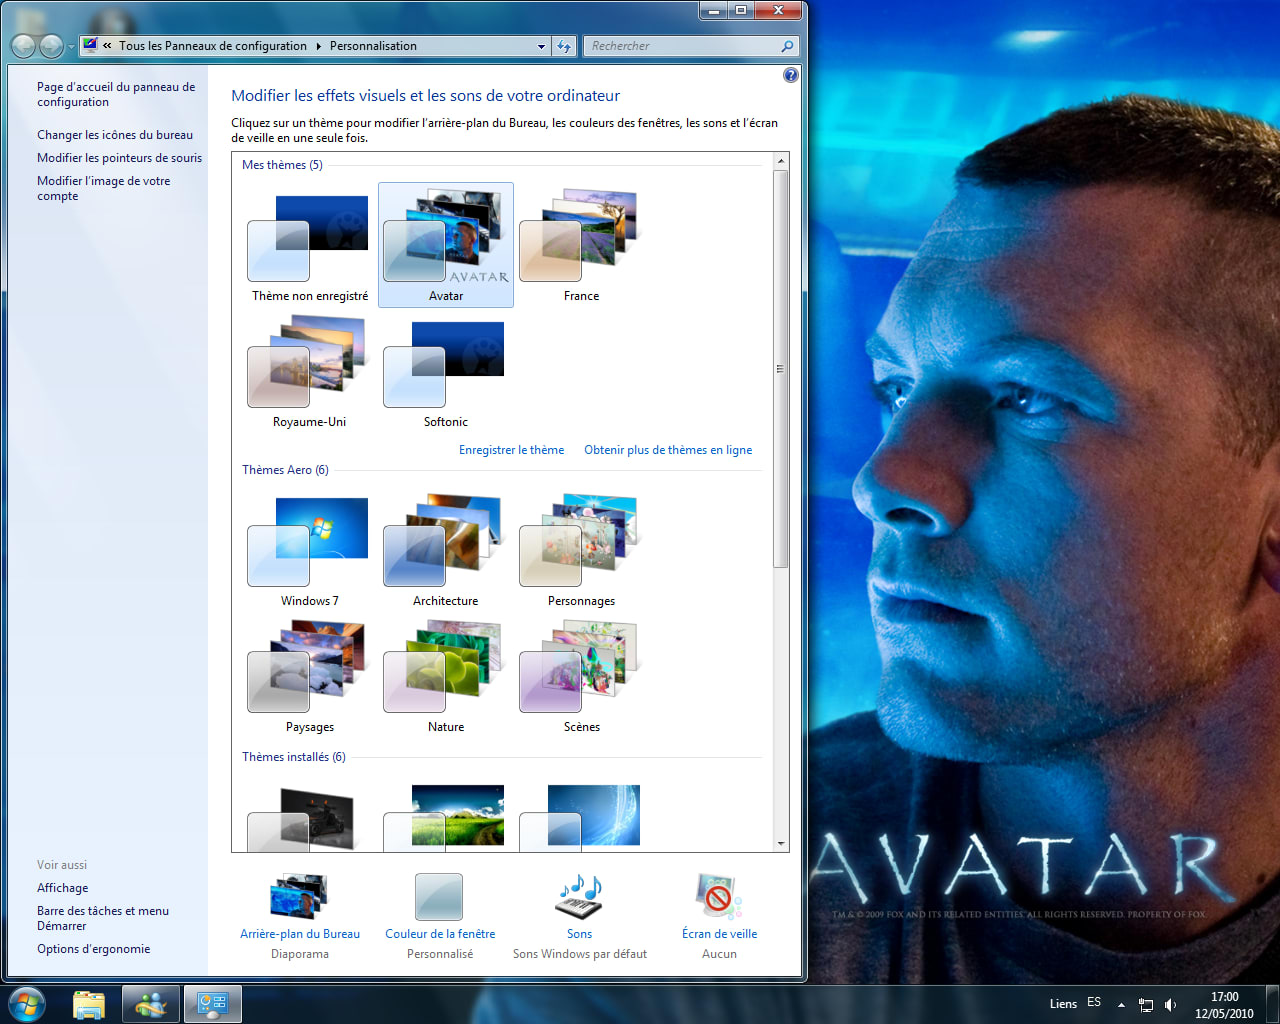 Avatar Wallpapers